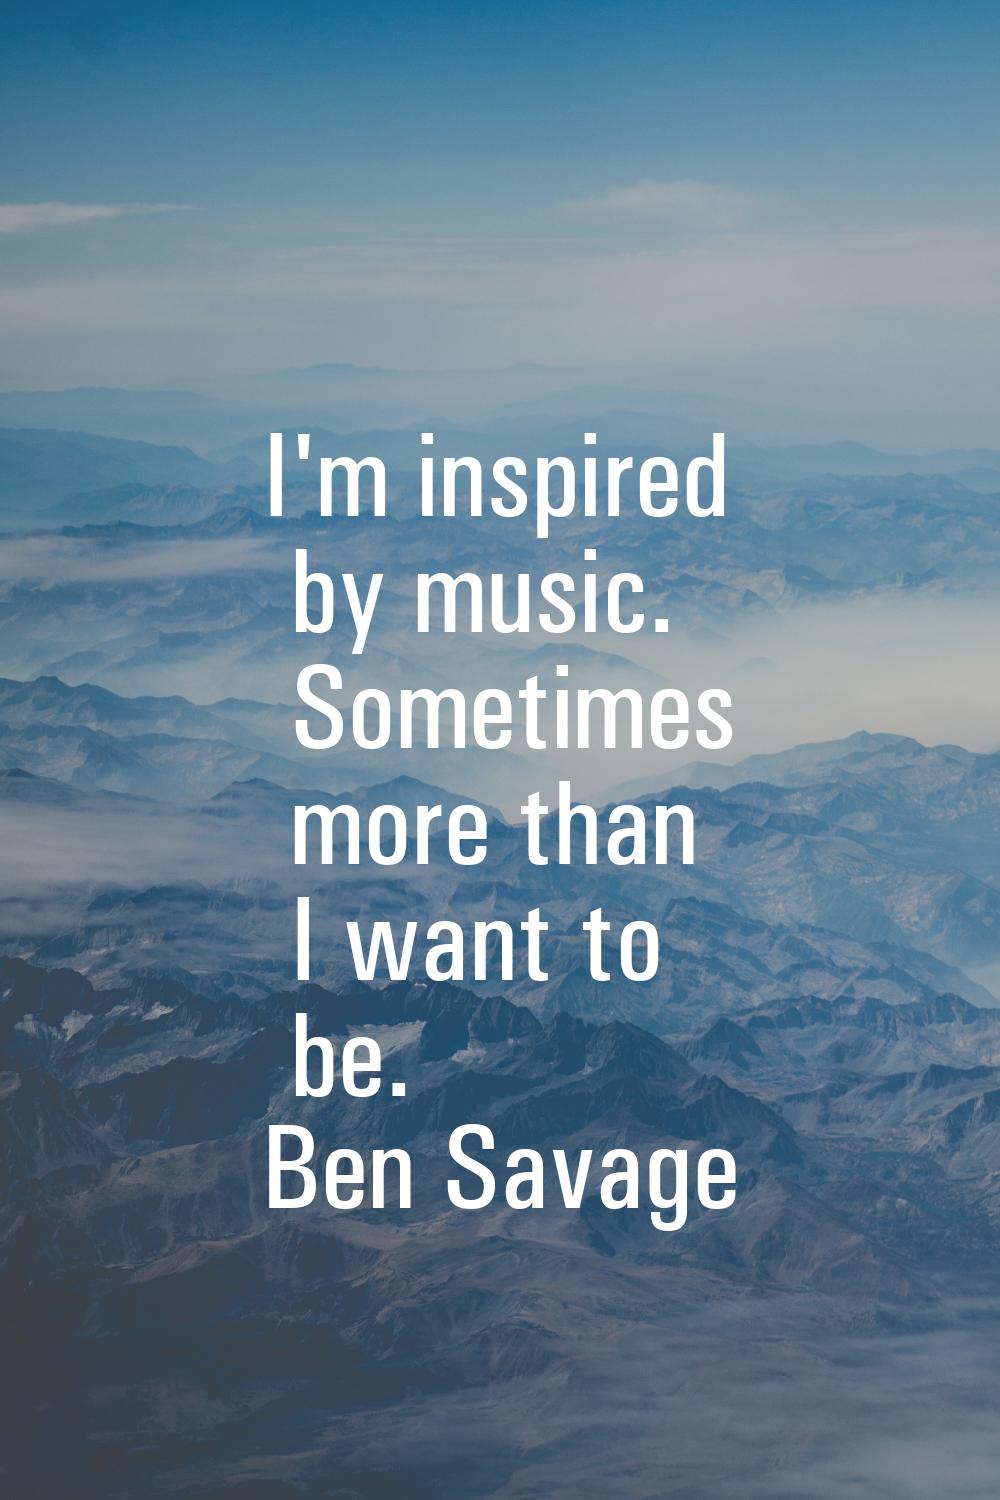 I'm inspired by music. Sometimes more than I want to be.